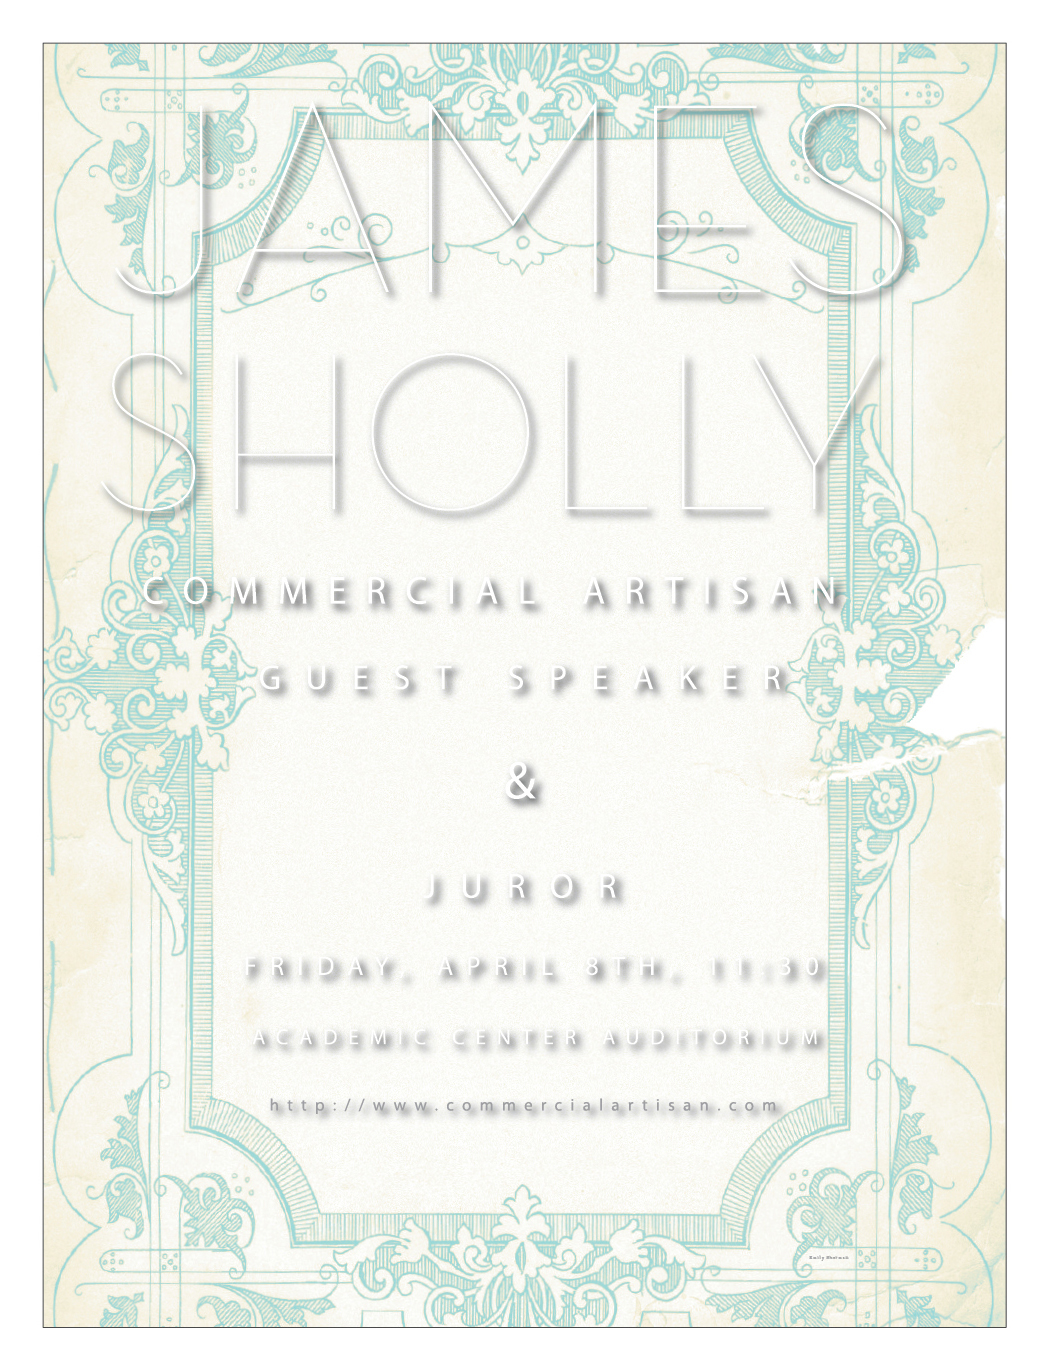 poster James Sholley Style Classic classic style modern ornate  letter presses guest speaker ringling